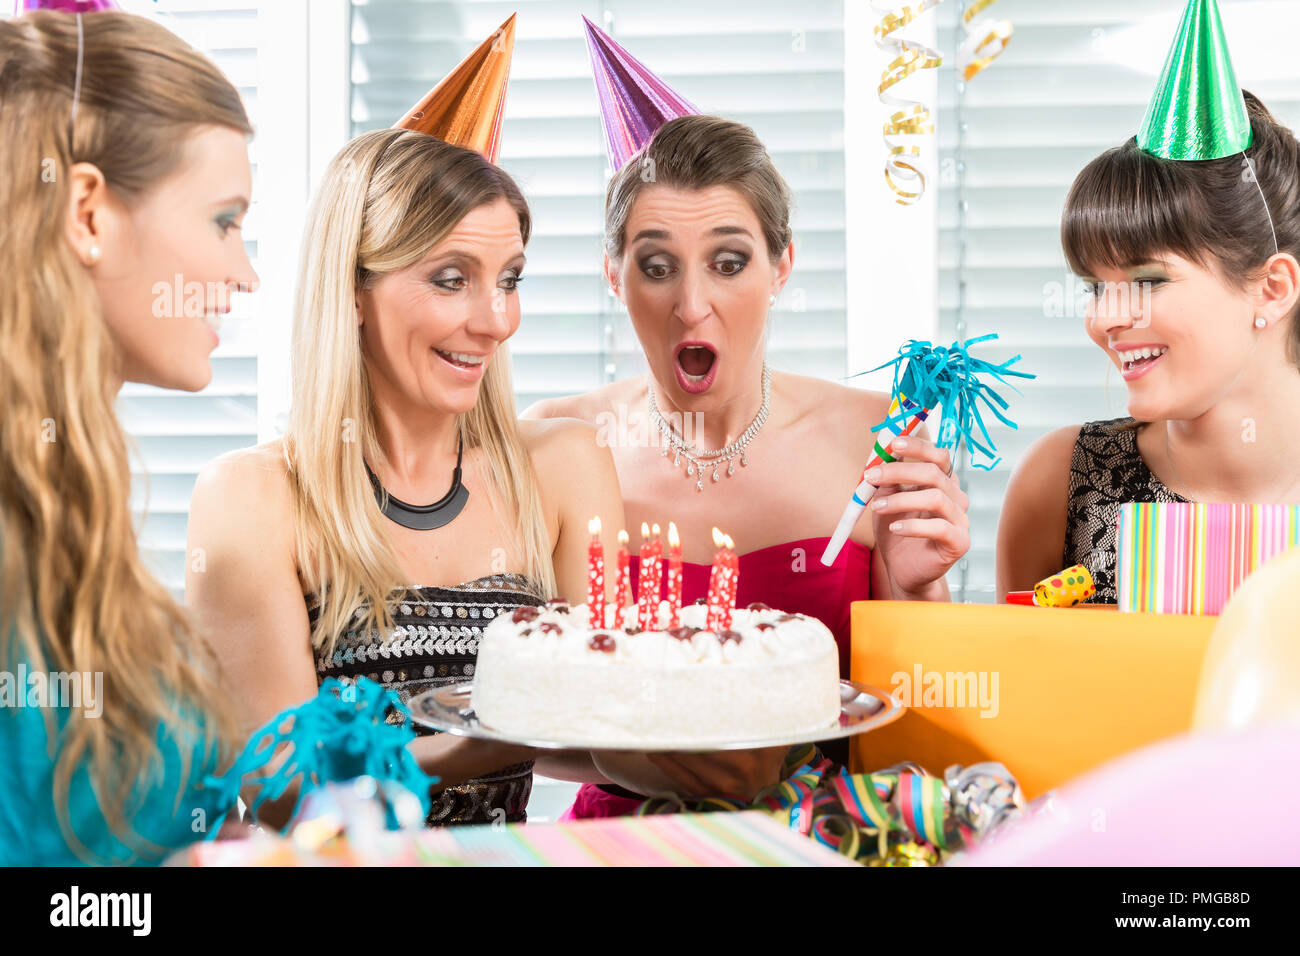 Woman blowing out candles on her birthday cake while celebrating Stock Photo